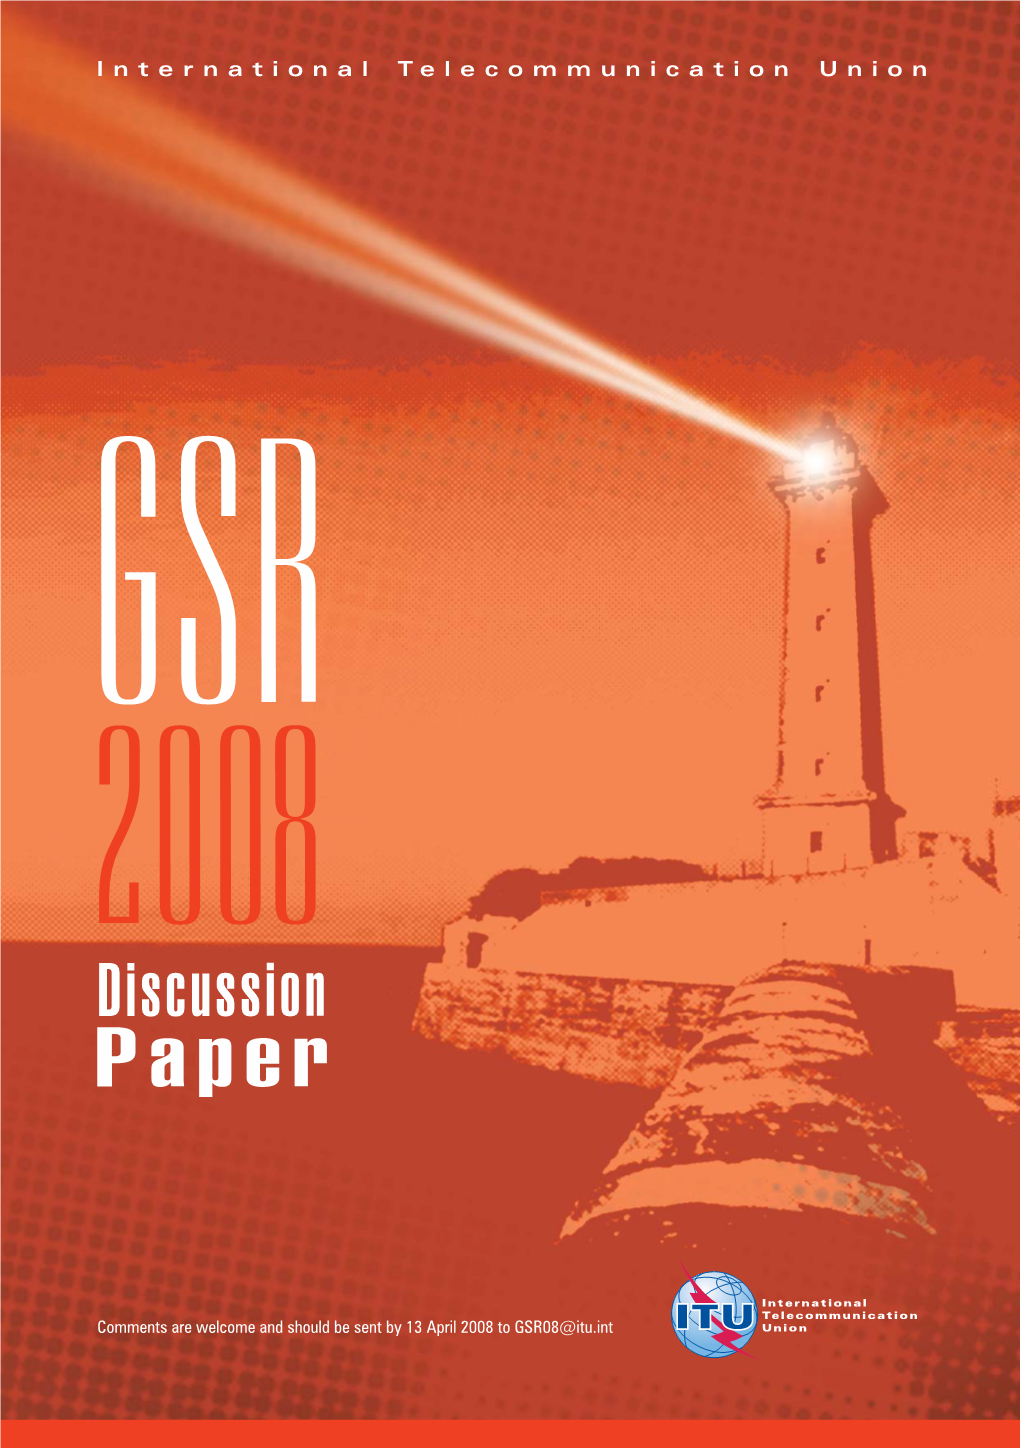 GSR Discussion Paper on Spectrum Sharing